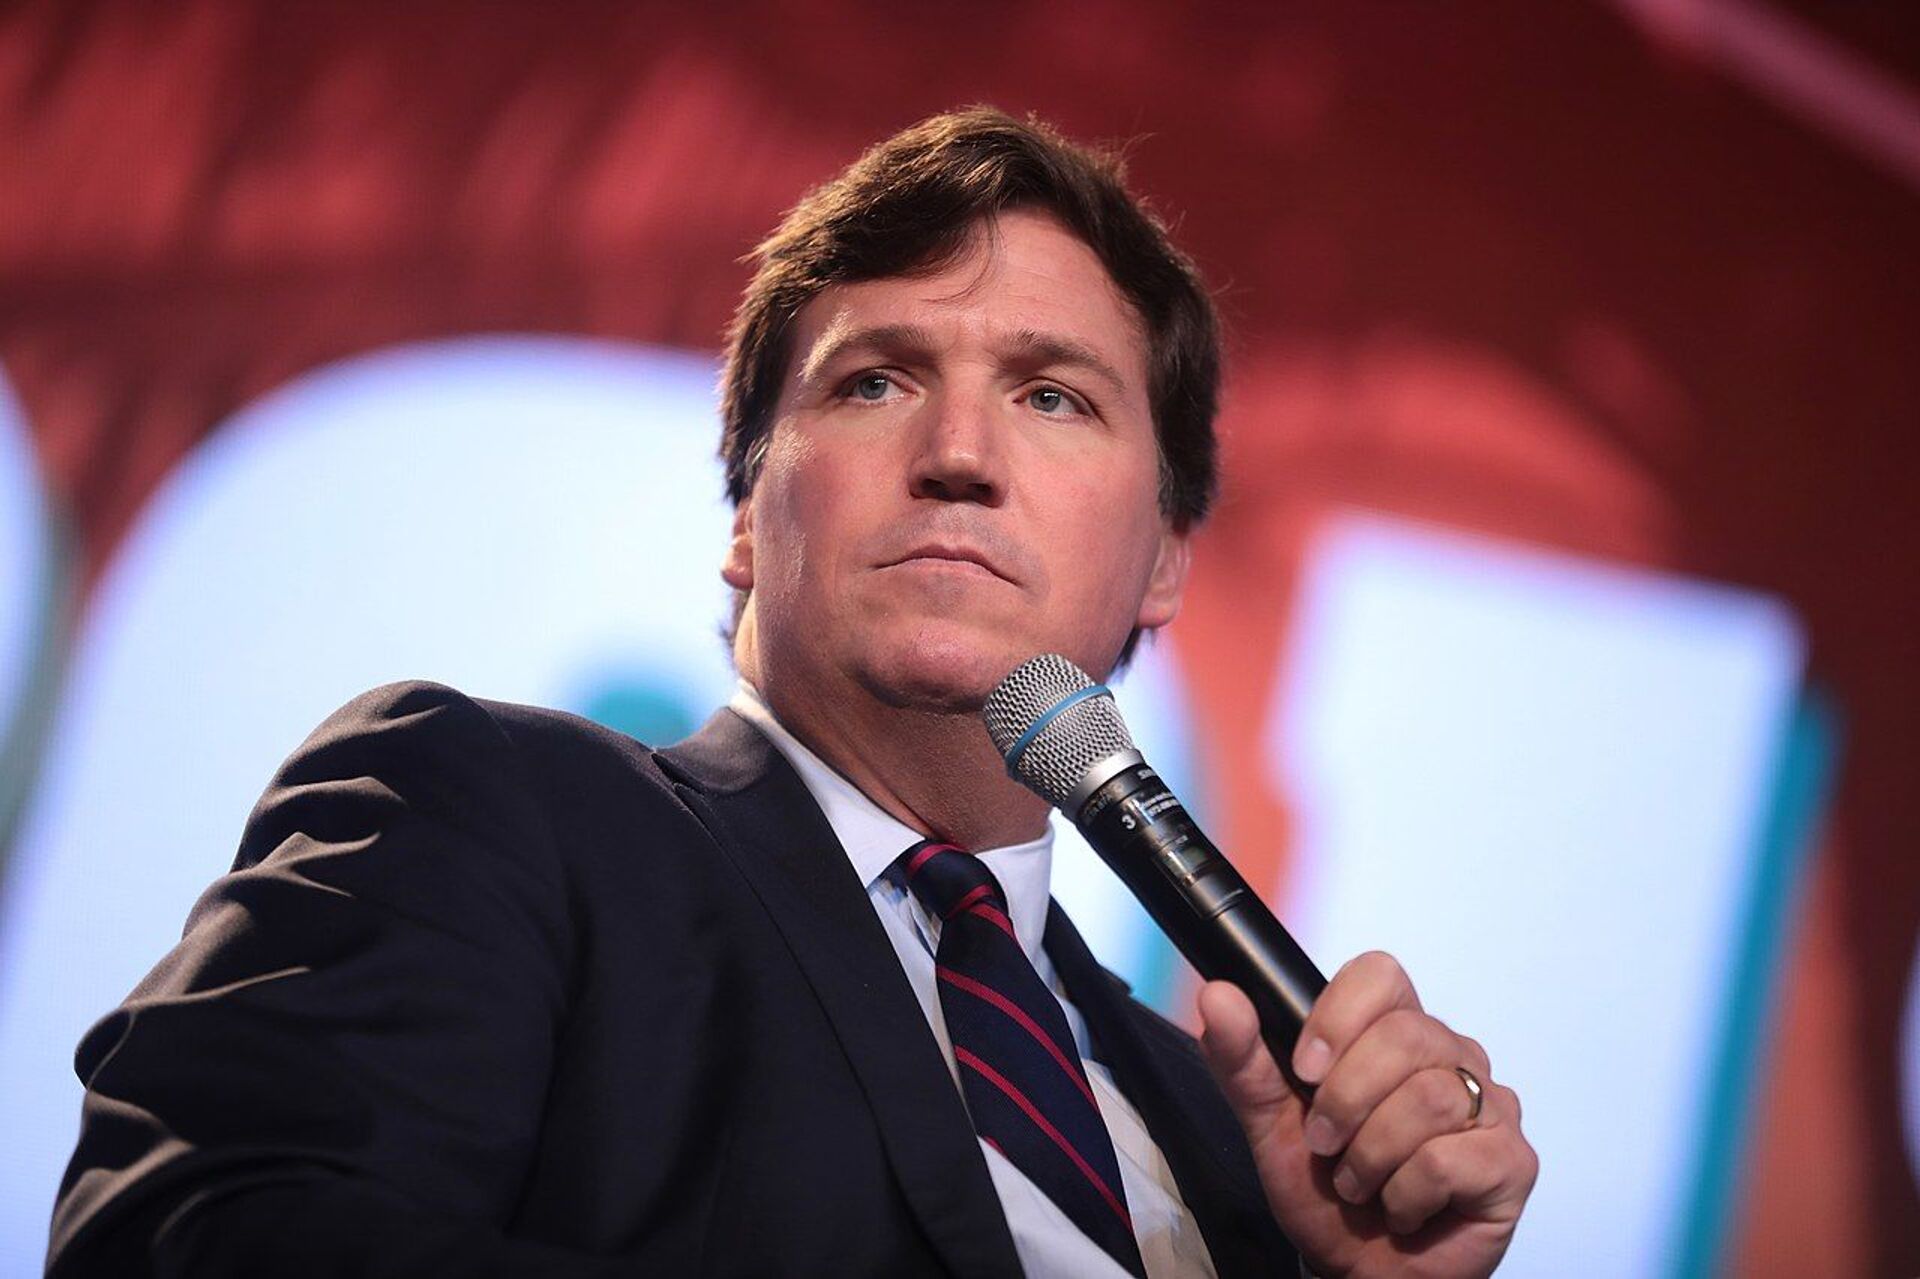 'This is Scary': Tucker Carlson Says Biden Administration Spying on Him for 'Political Reasons' - Sputnik International, 1920, 29.06.2021